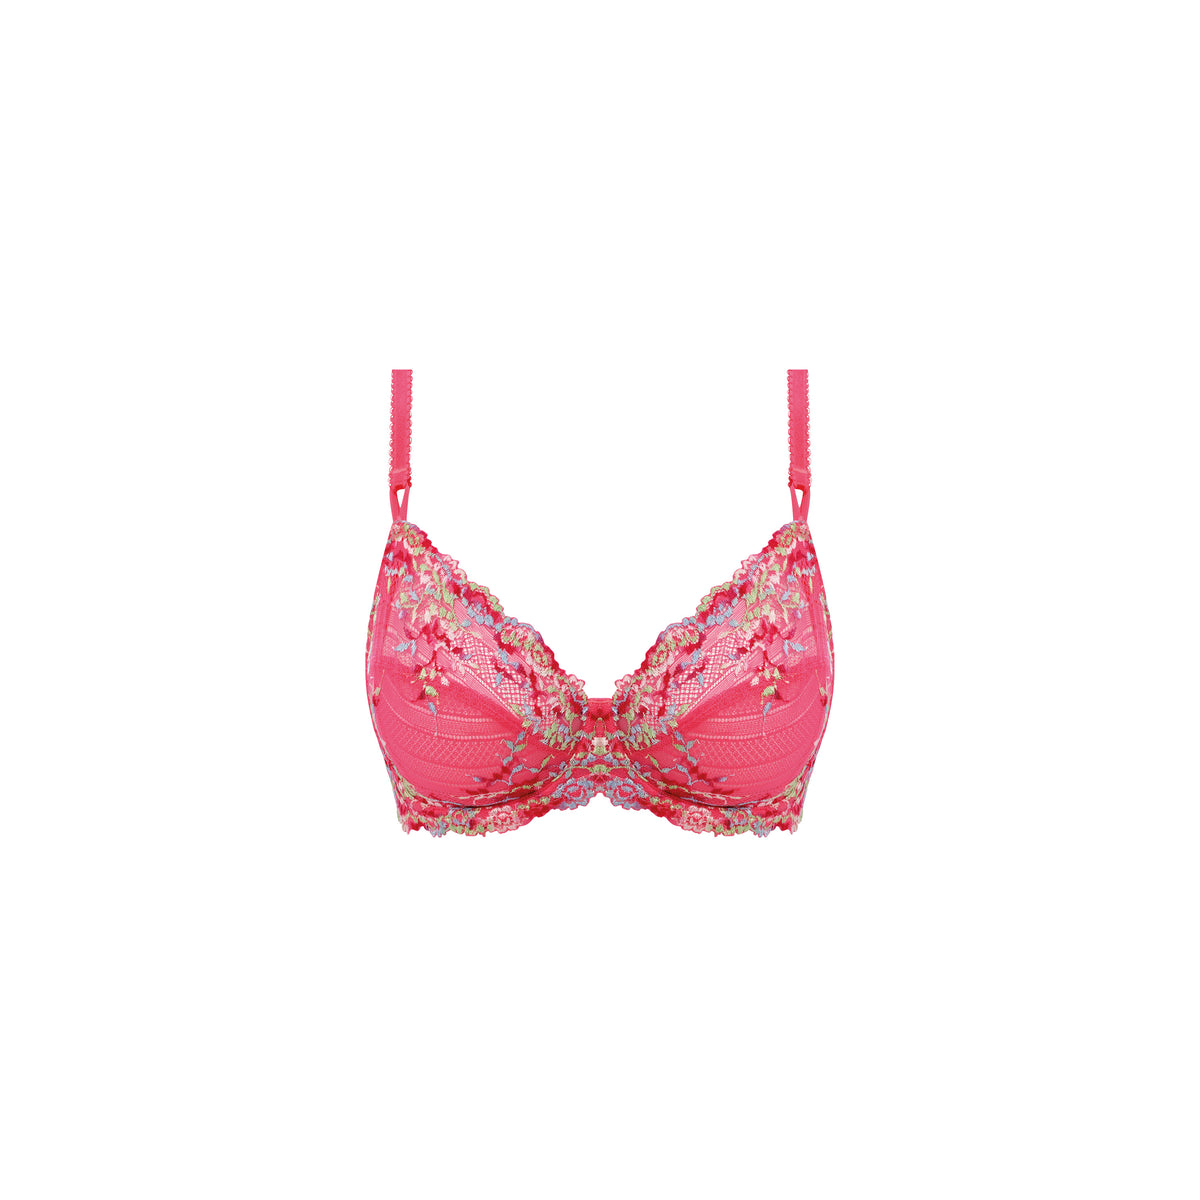 Embrace Lace Hot Pink Full Cup Bra